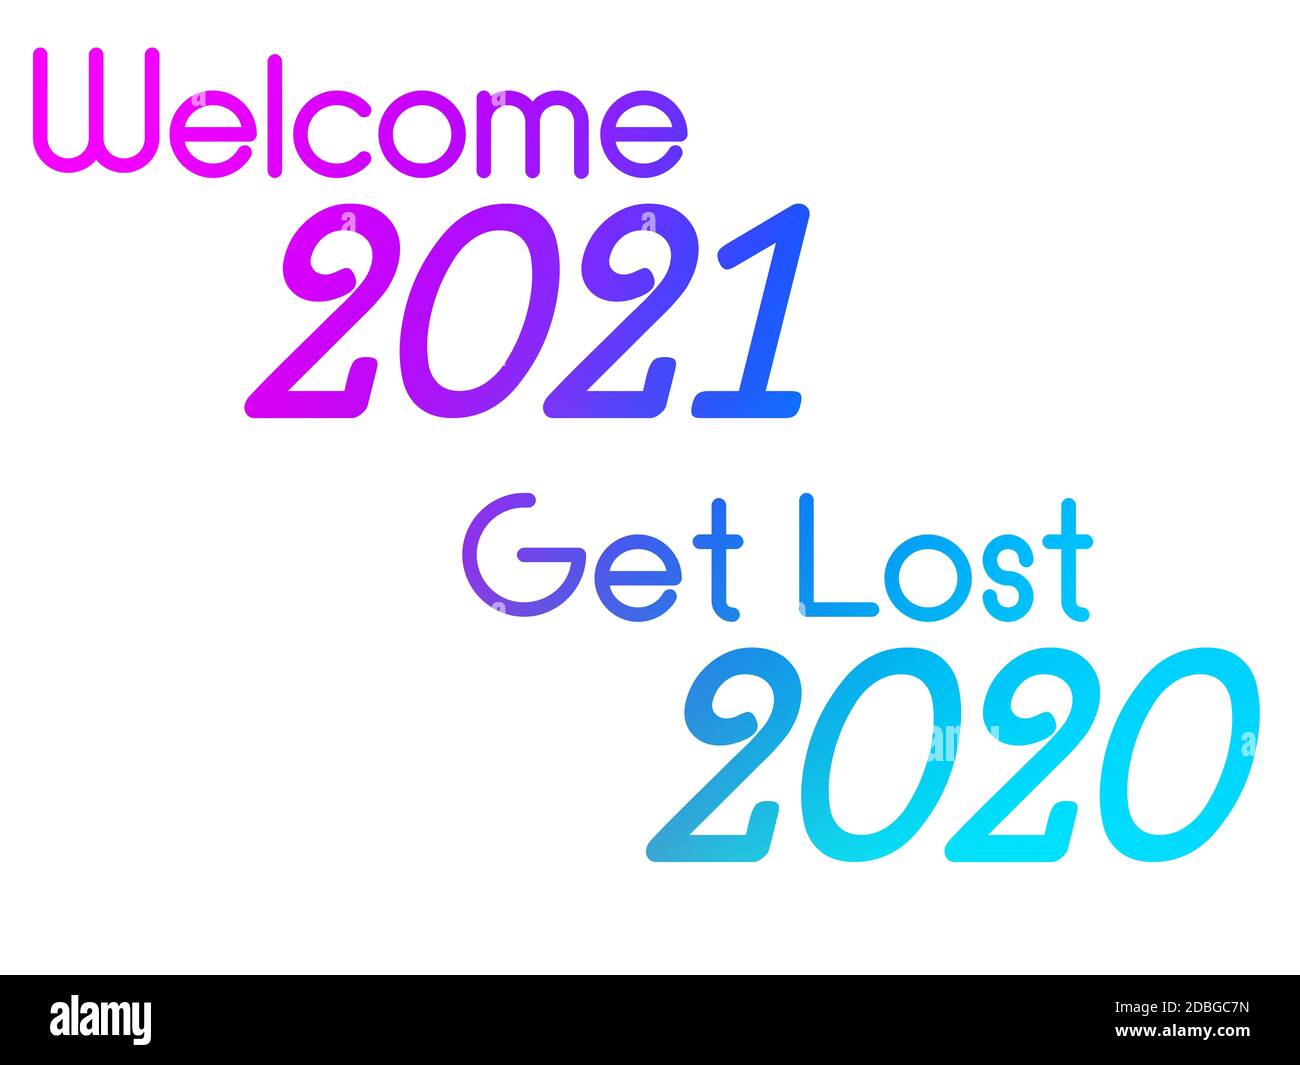 A colorful illustration of a happy new year with phase Welcome 2021 get lost 2020. Stock Photo